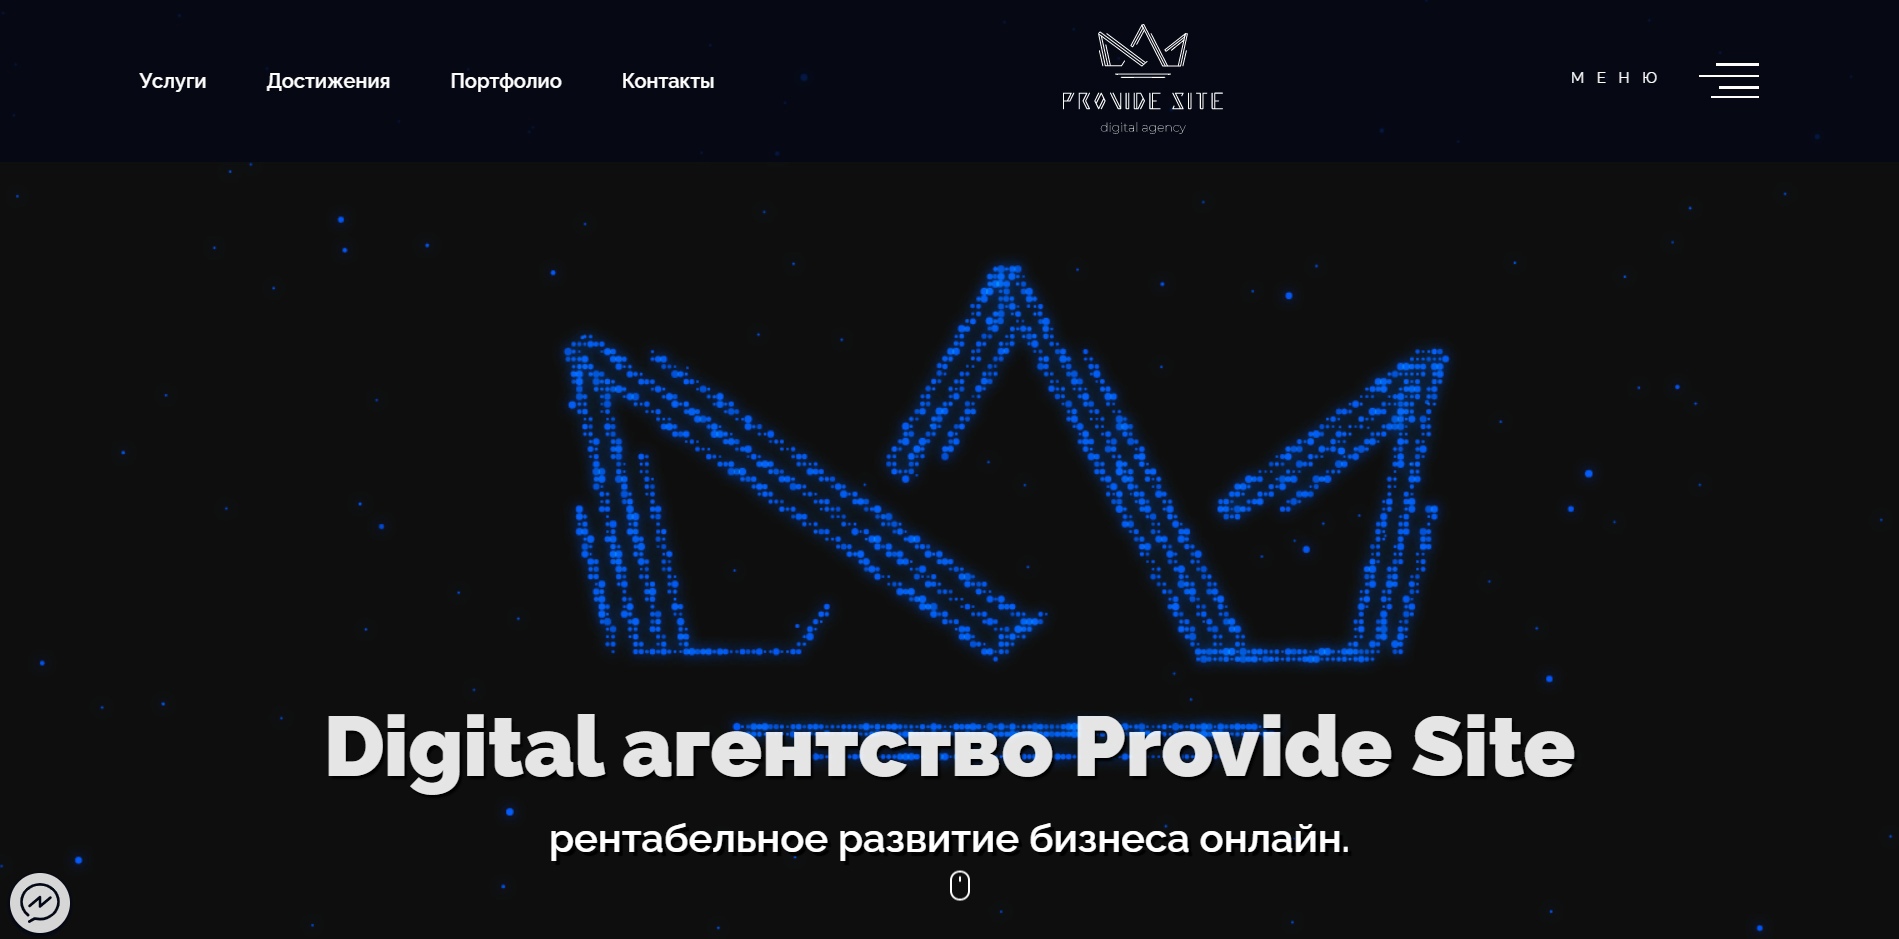 Example of the ProvideSite multipage website